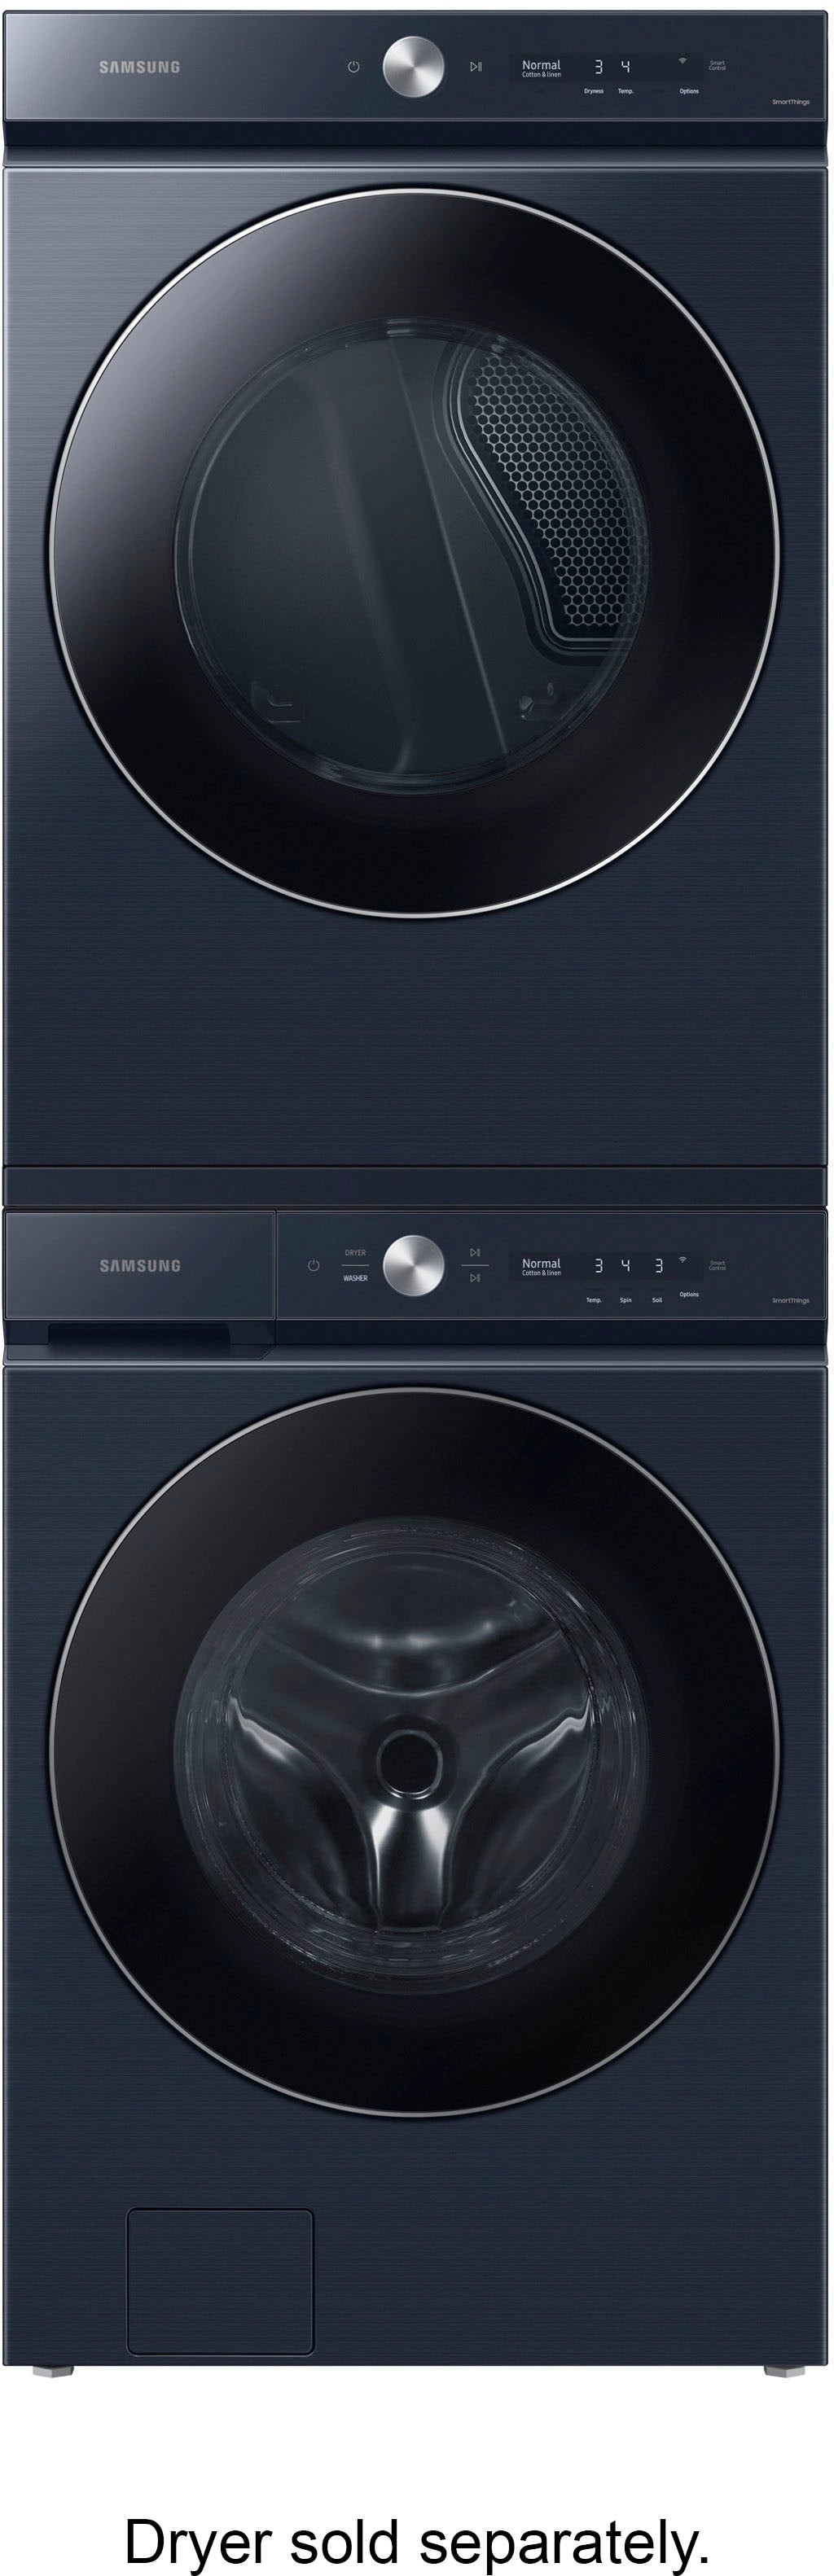 Samsung - Bespoke 5.3 cu. ft. Ultra Capacity Front Load Washer with AI OptiWash and Auto Dispense - Brushed navy_11